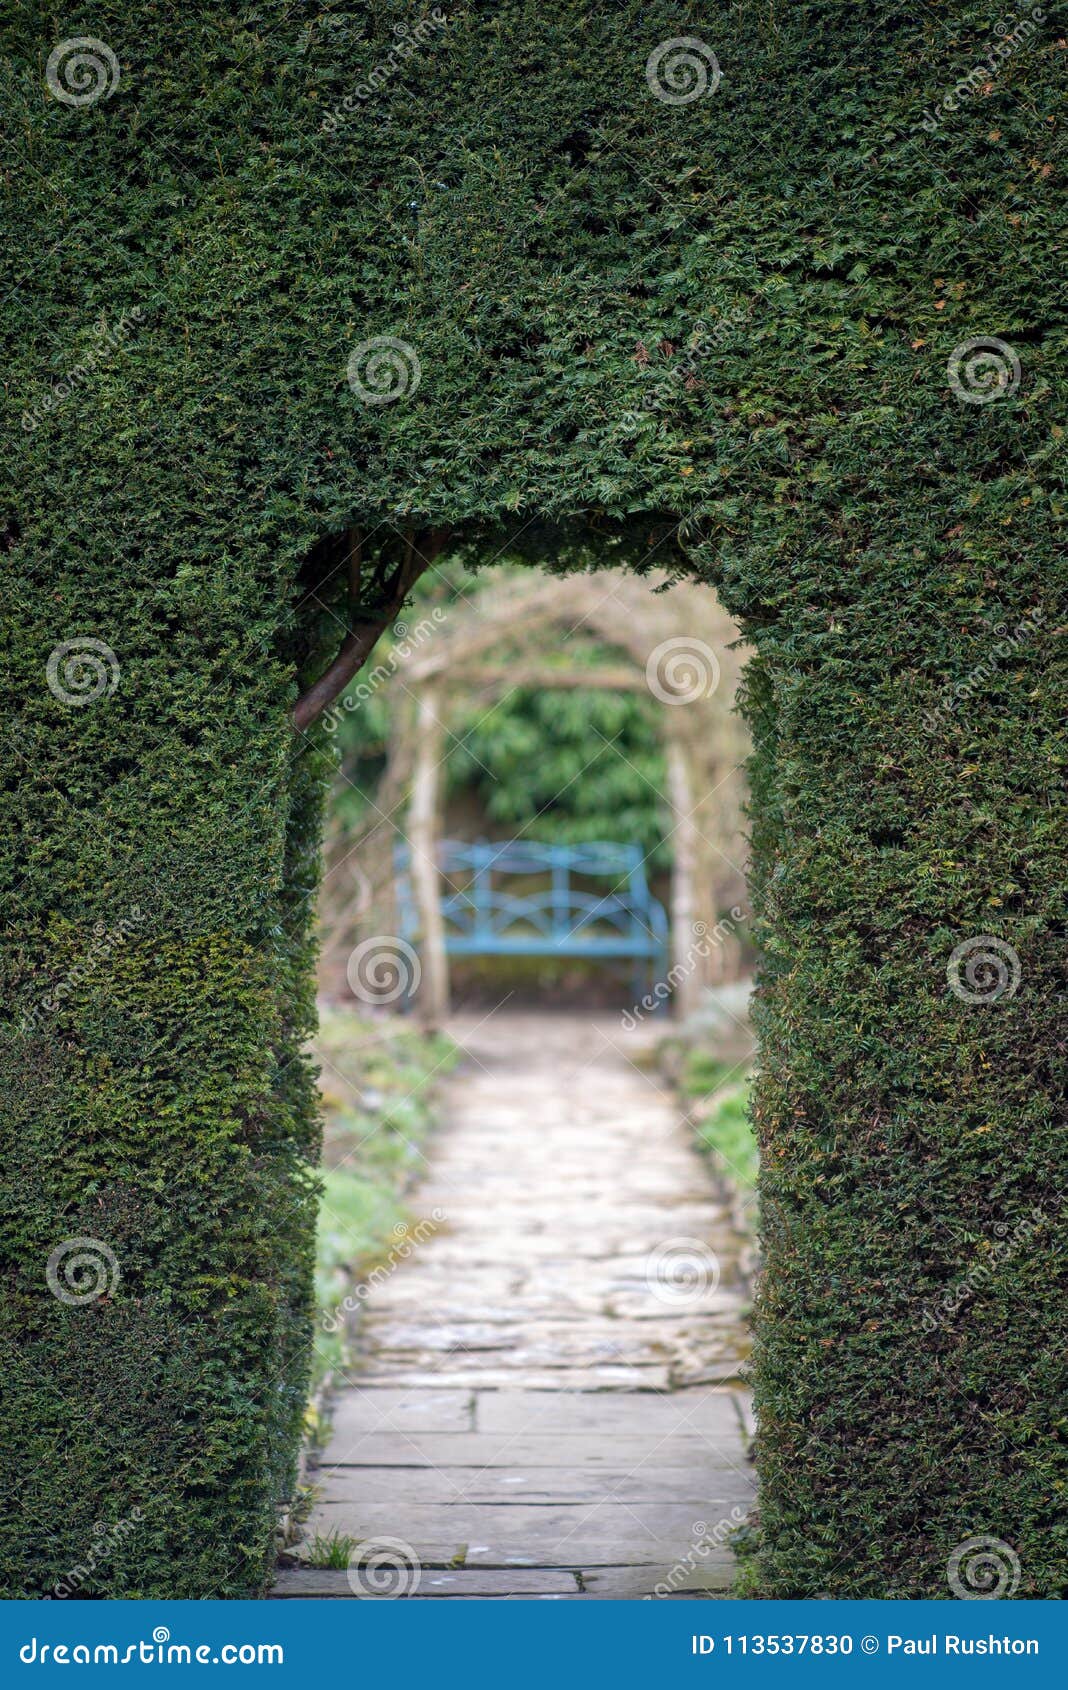 Entrance To Maze through Hedge Stock Photo - Image of exit, arch: 113537830